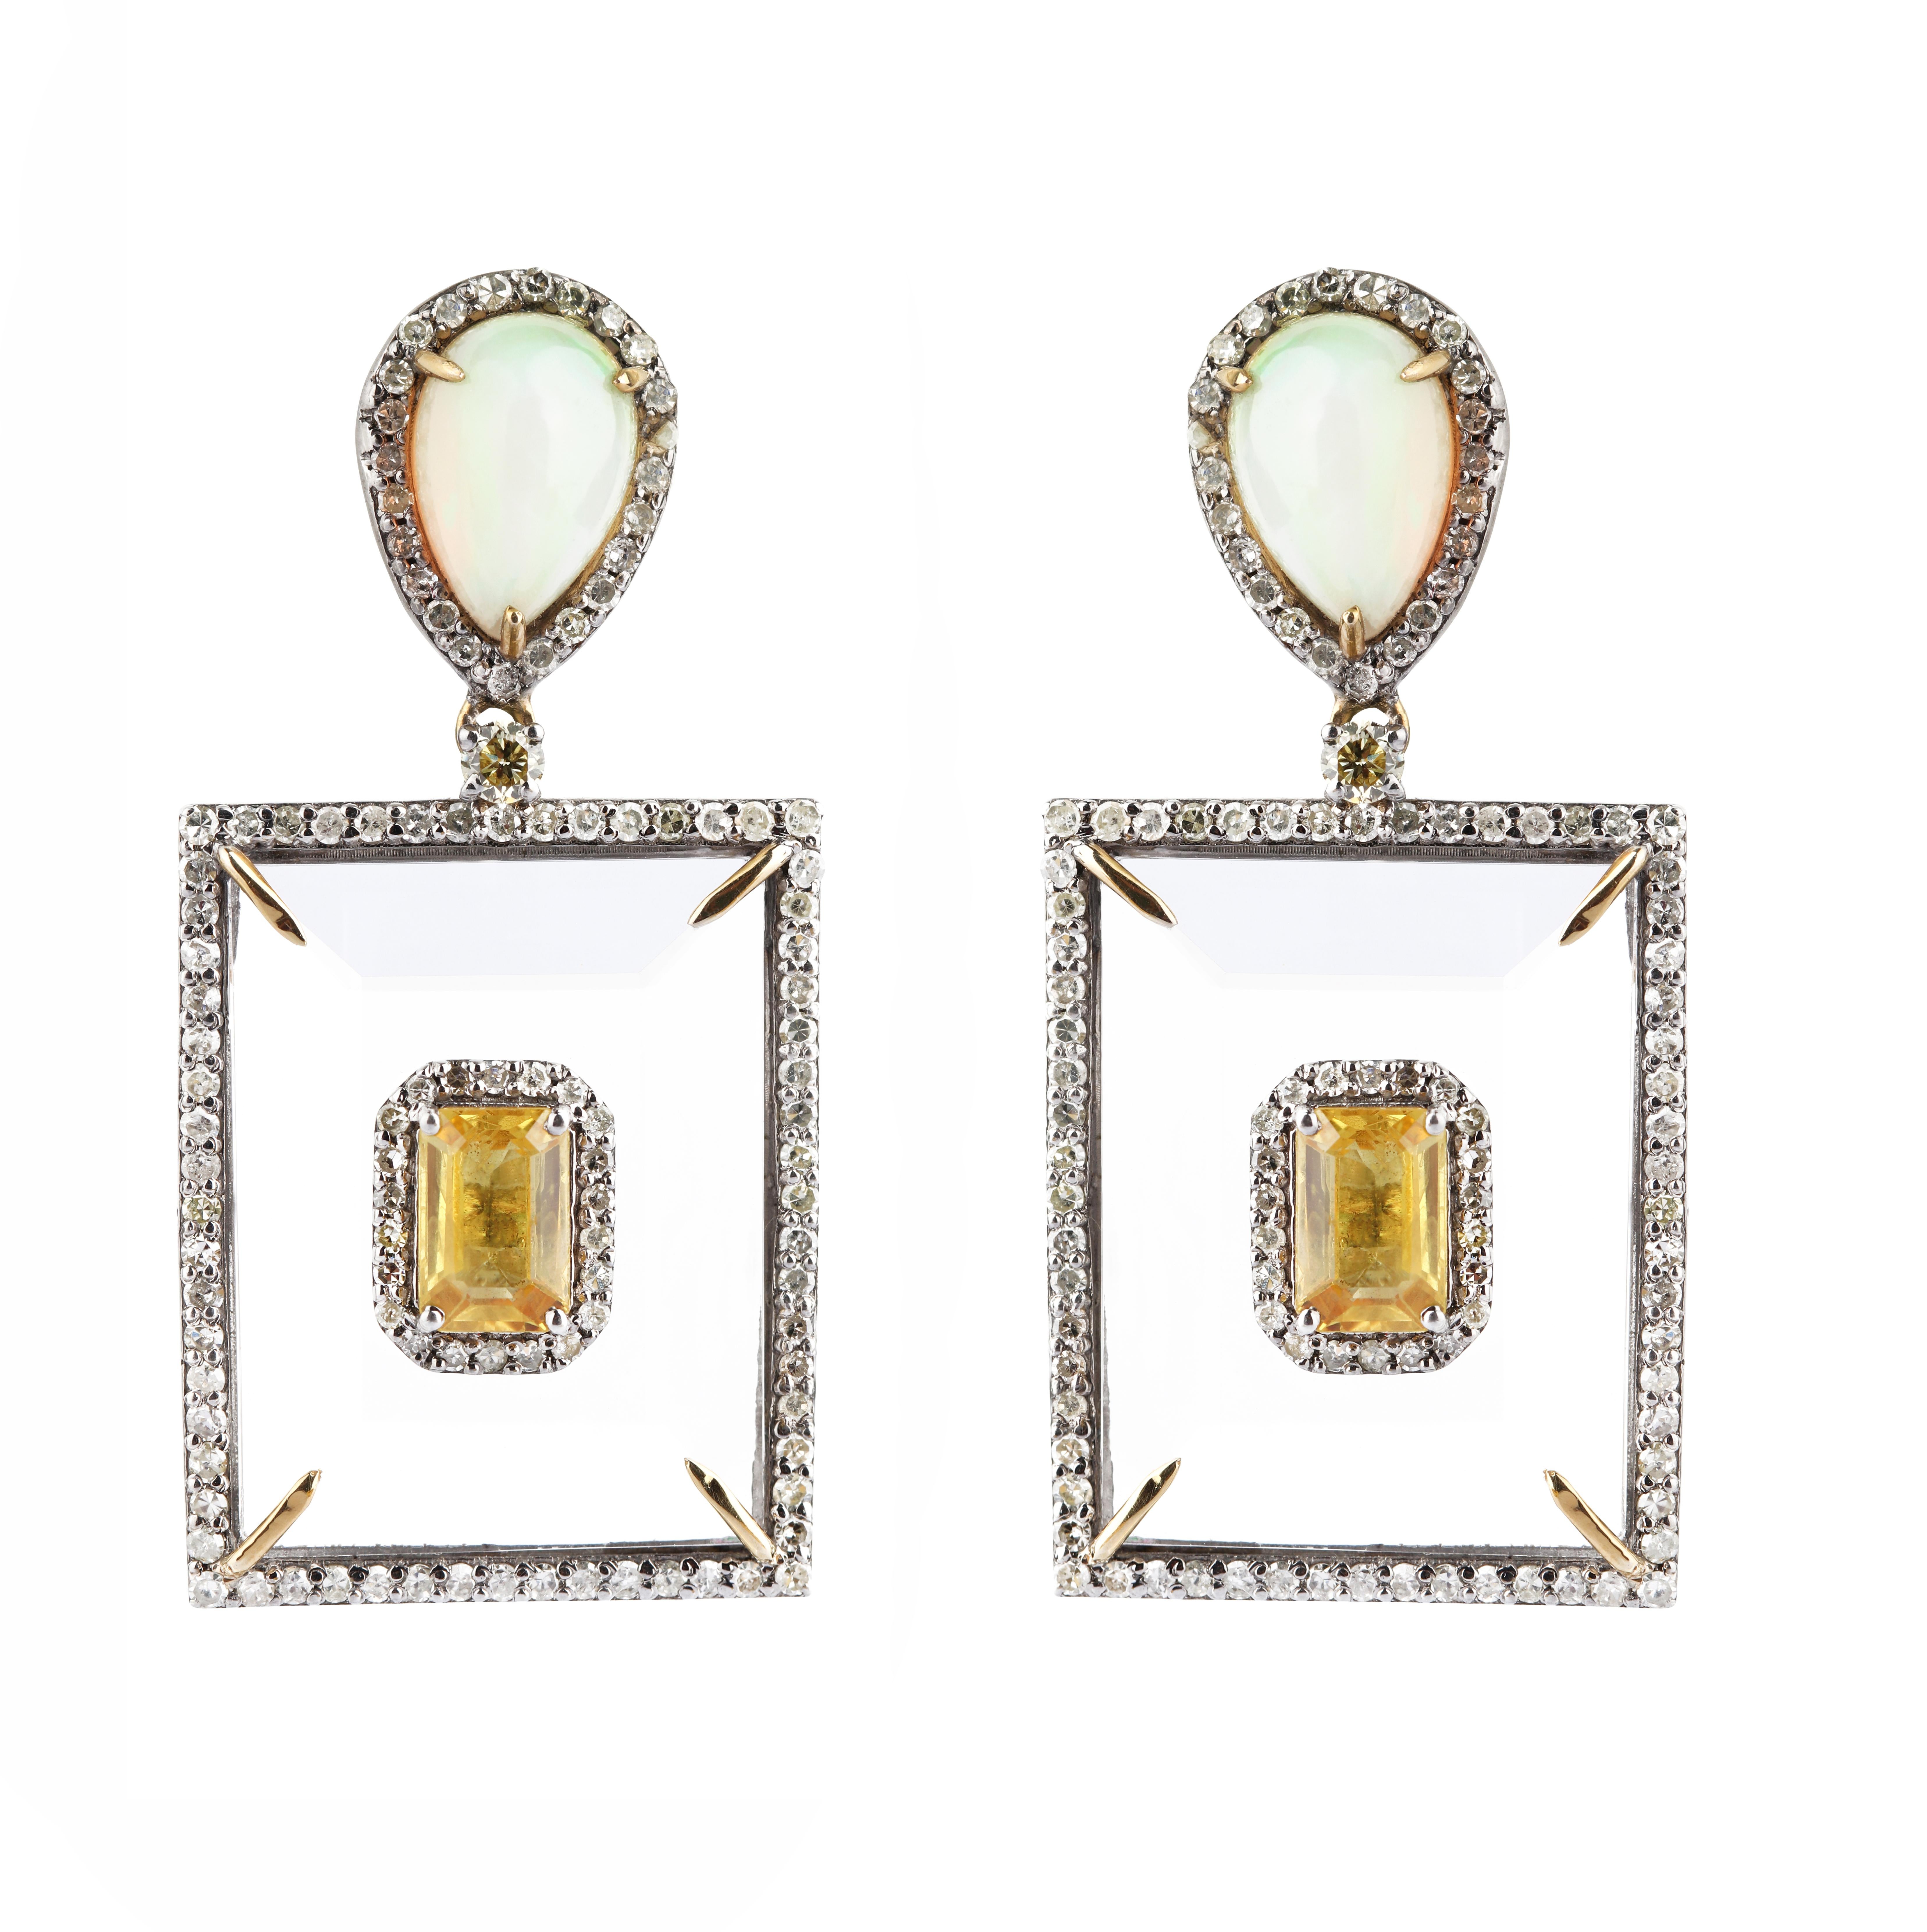 Emerald Cut 22.19 Carats Crystal, Diamond, Opal, and Yellow Sapphire Dangle Earrings For Sale